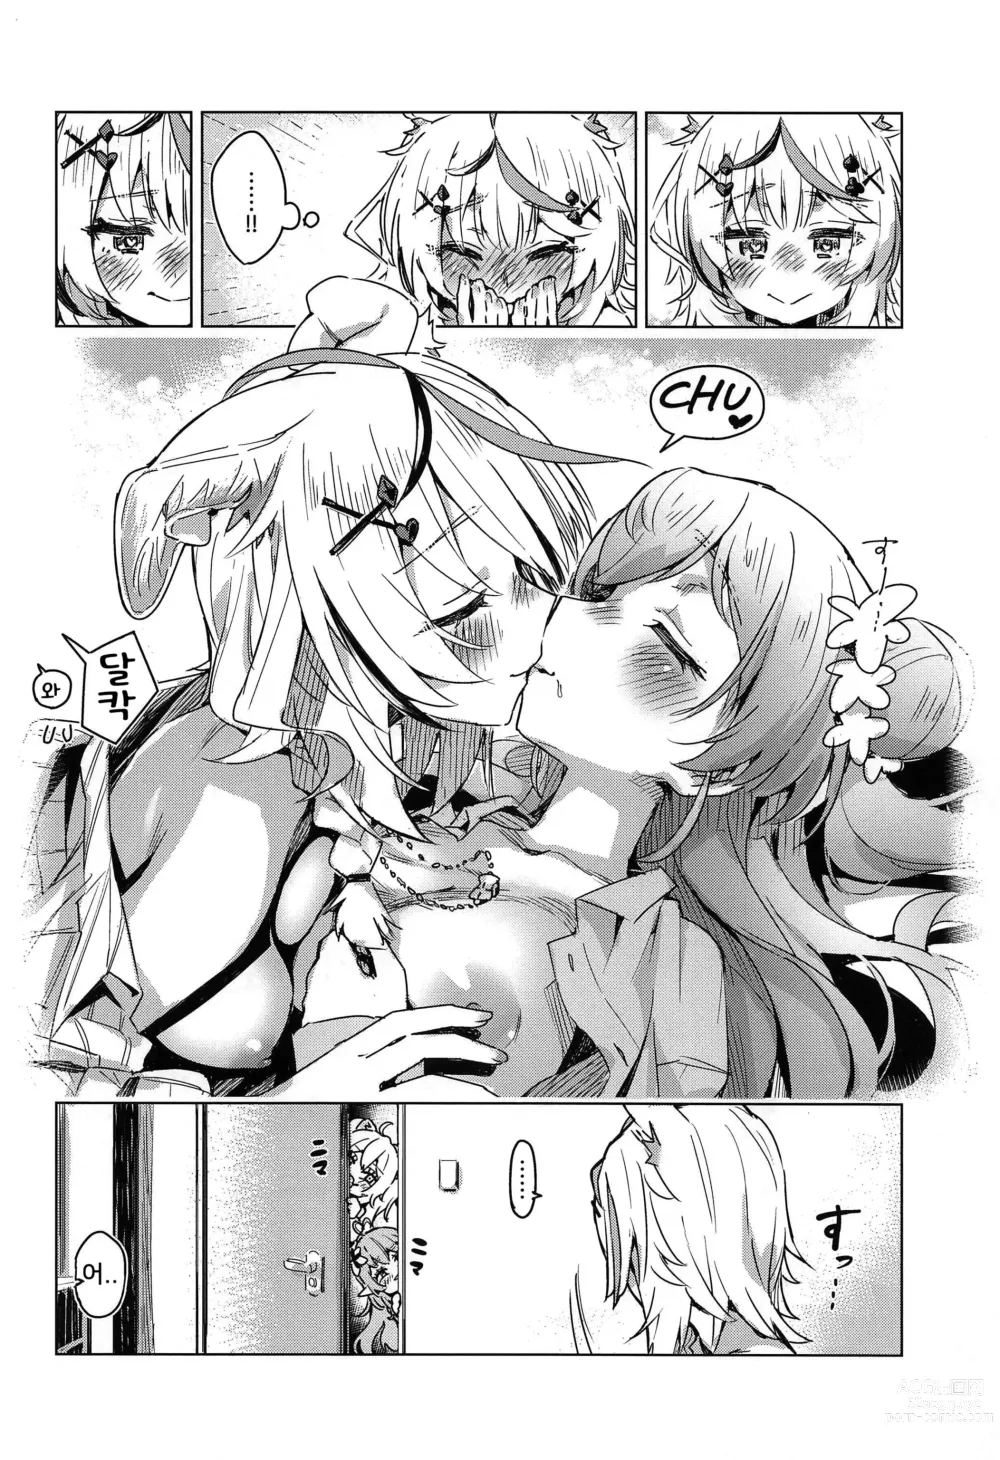 Page 27 of doujinshi Fennec wa Iseijin no Yume o Miru ka - Does The Fennec Dream of The Lovely Visitor?